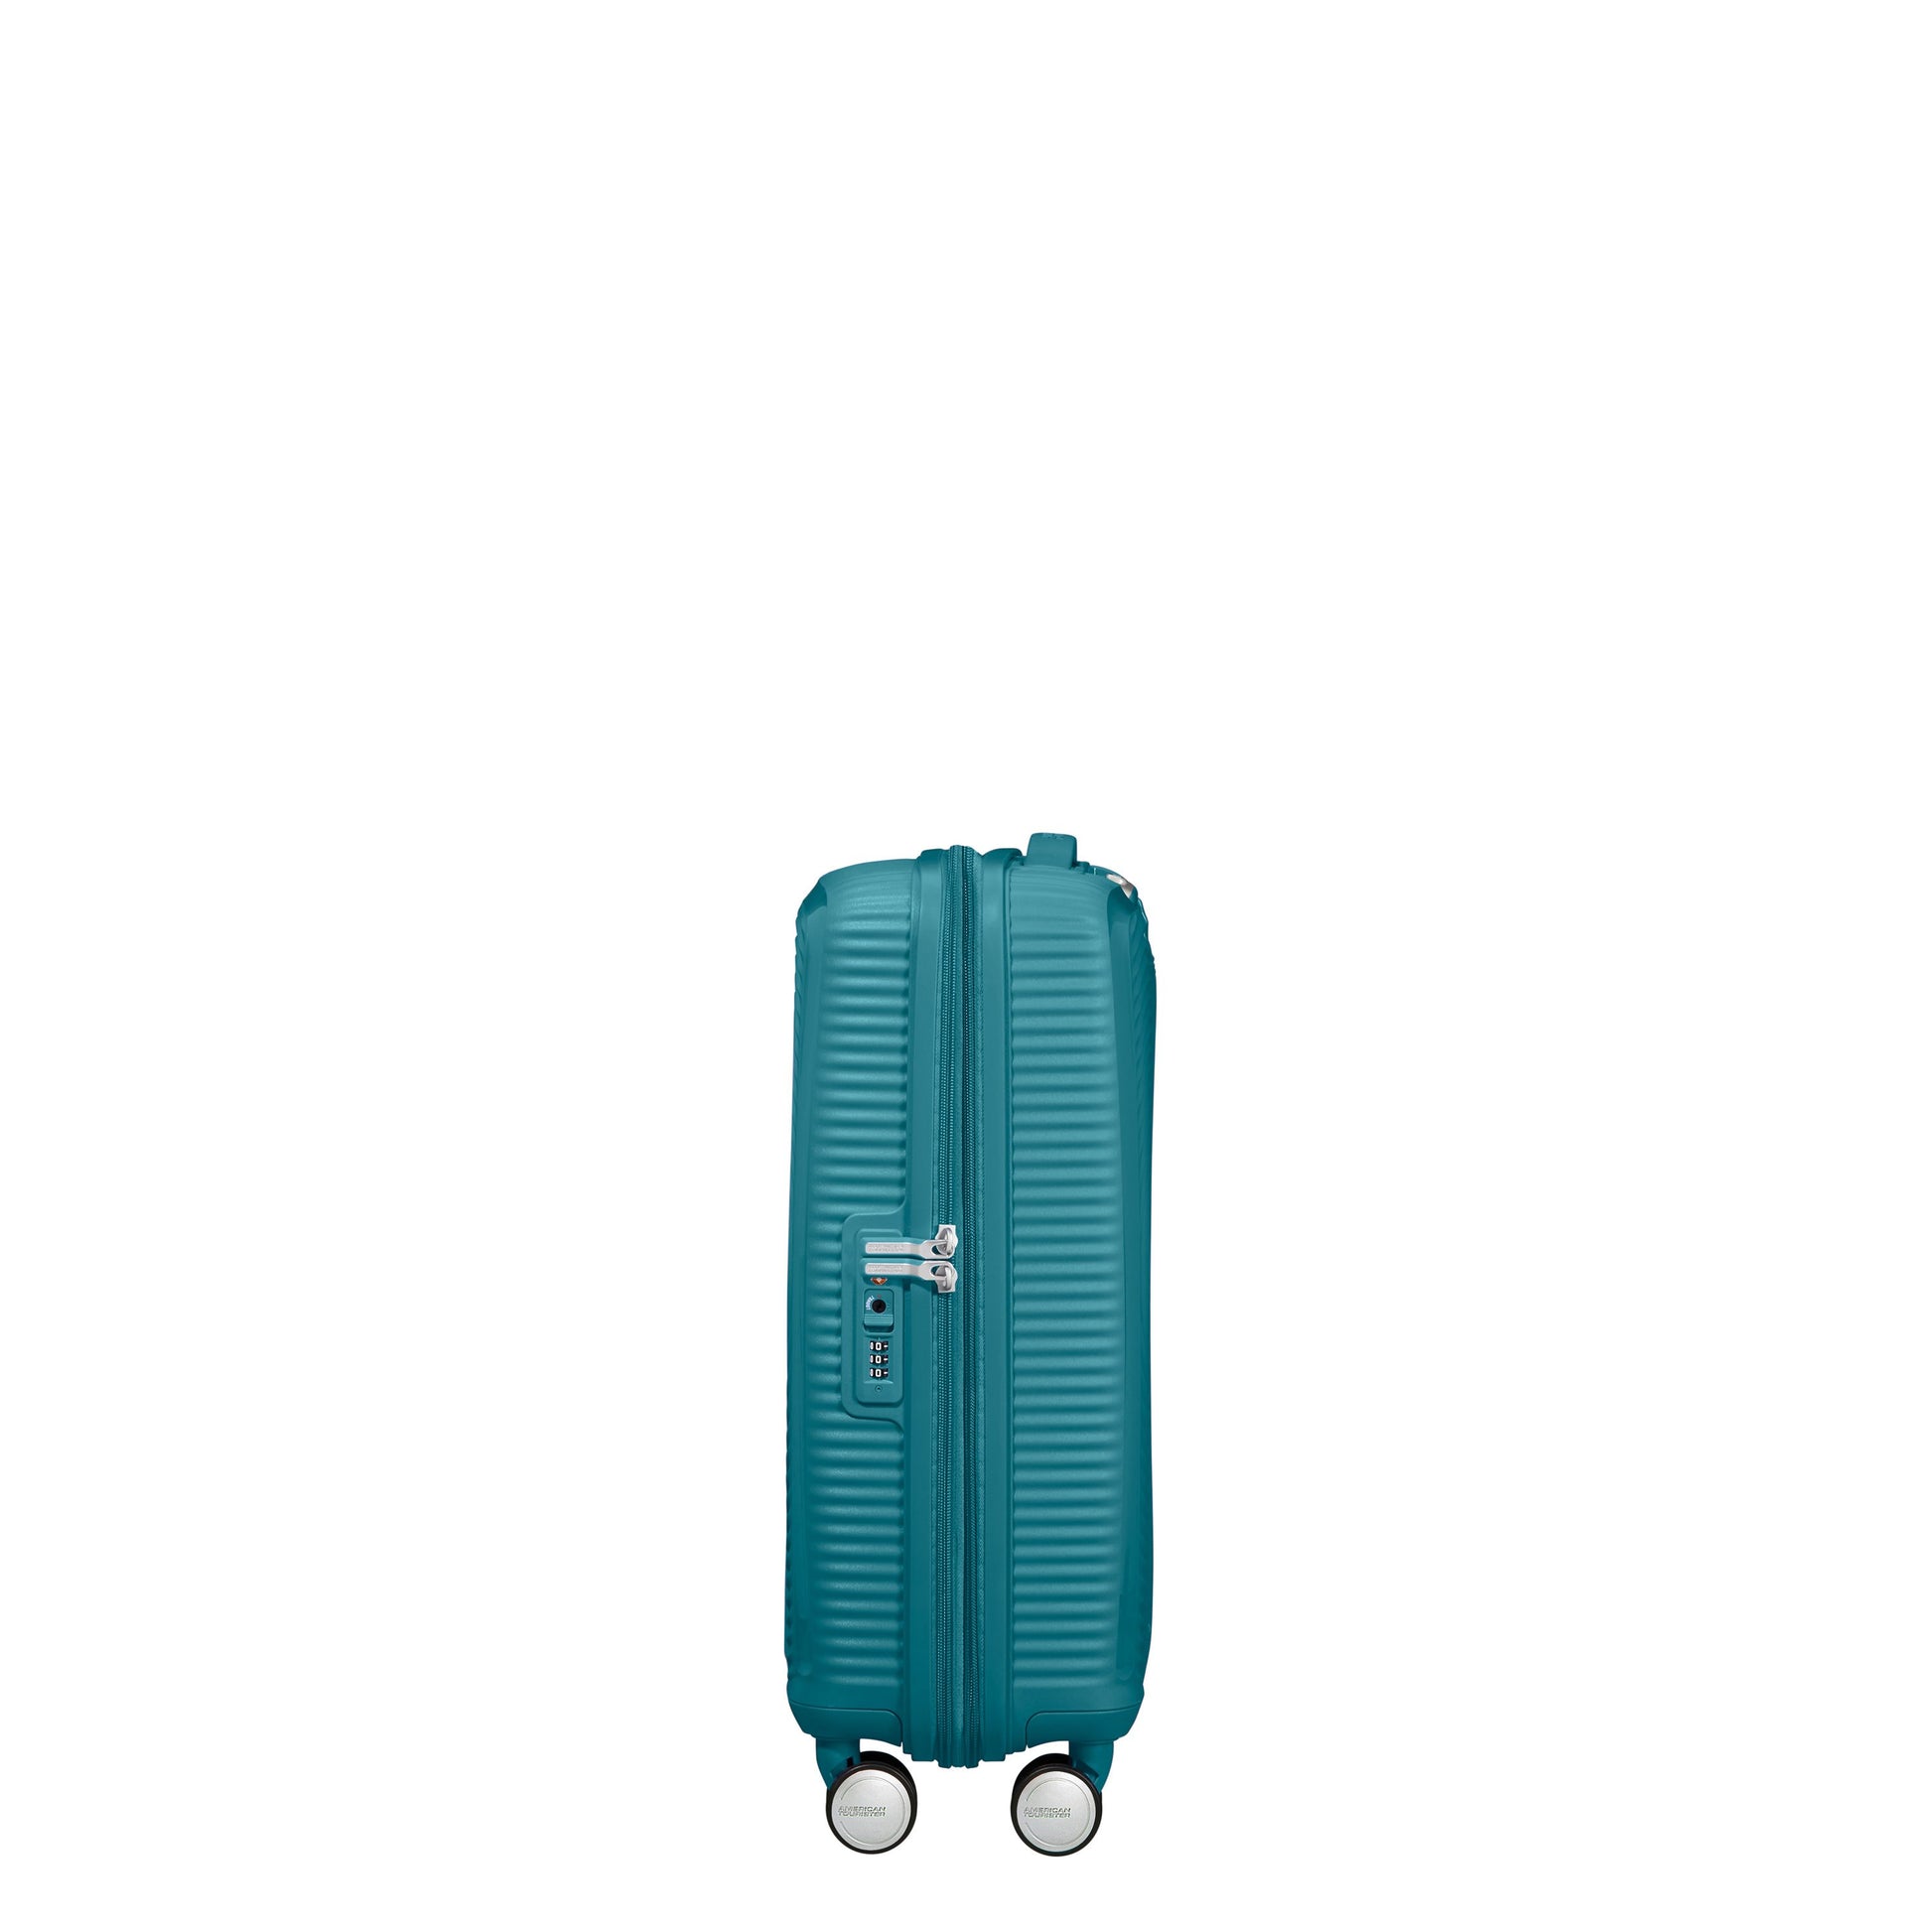 American Tourister Curio Spinner Carry-On Expandable Luggage